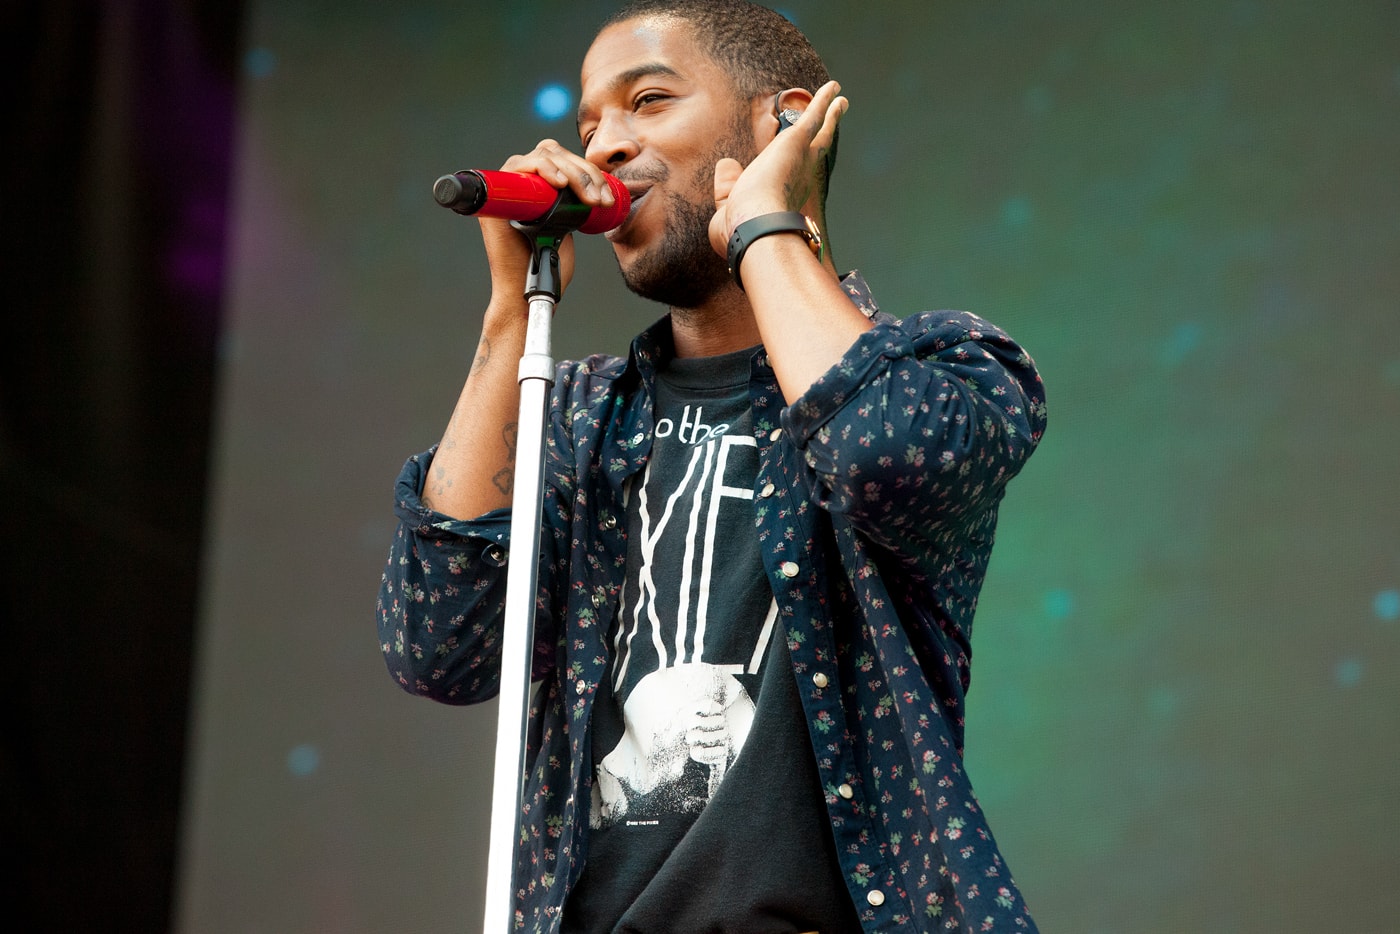 kid-cudi-treated-fans-to-watch-star-wars-the-force-awakens-with-him